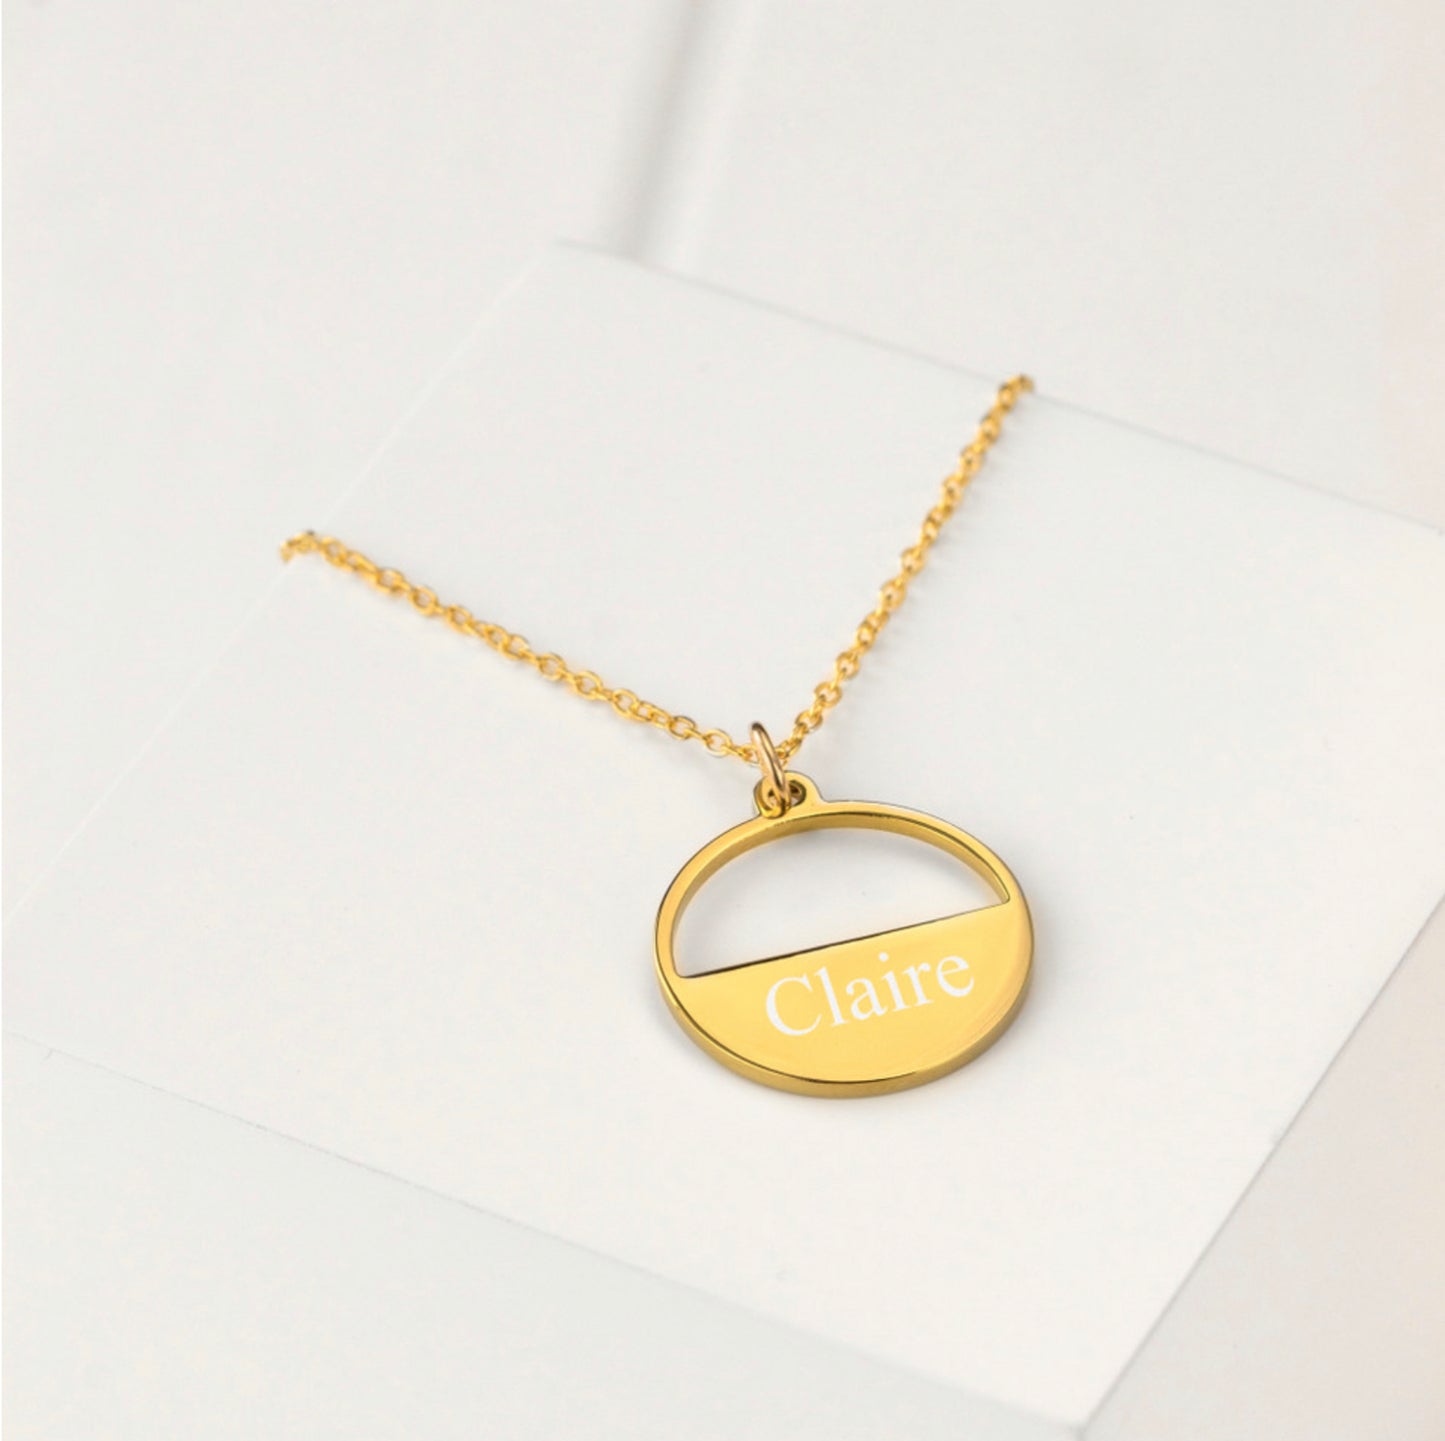 Personalised Modern Half-Moon Gold Pendant Necklace